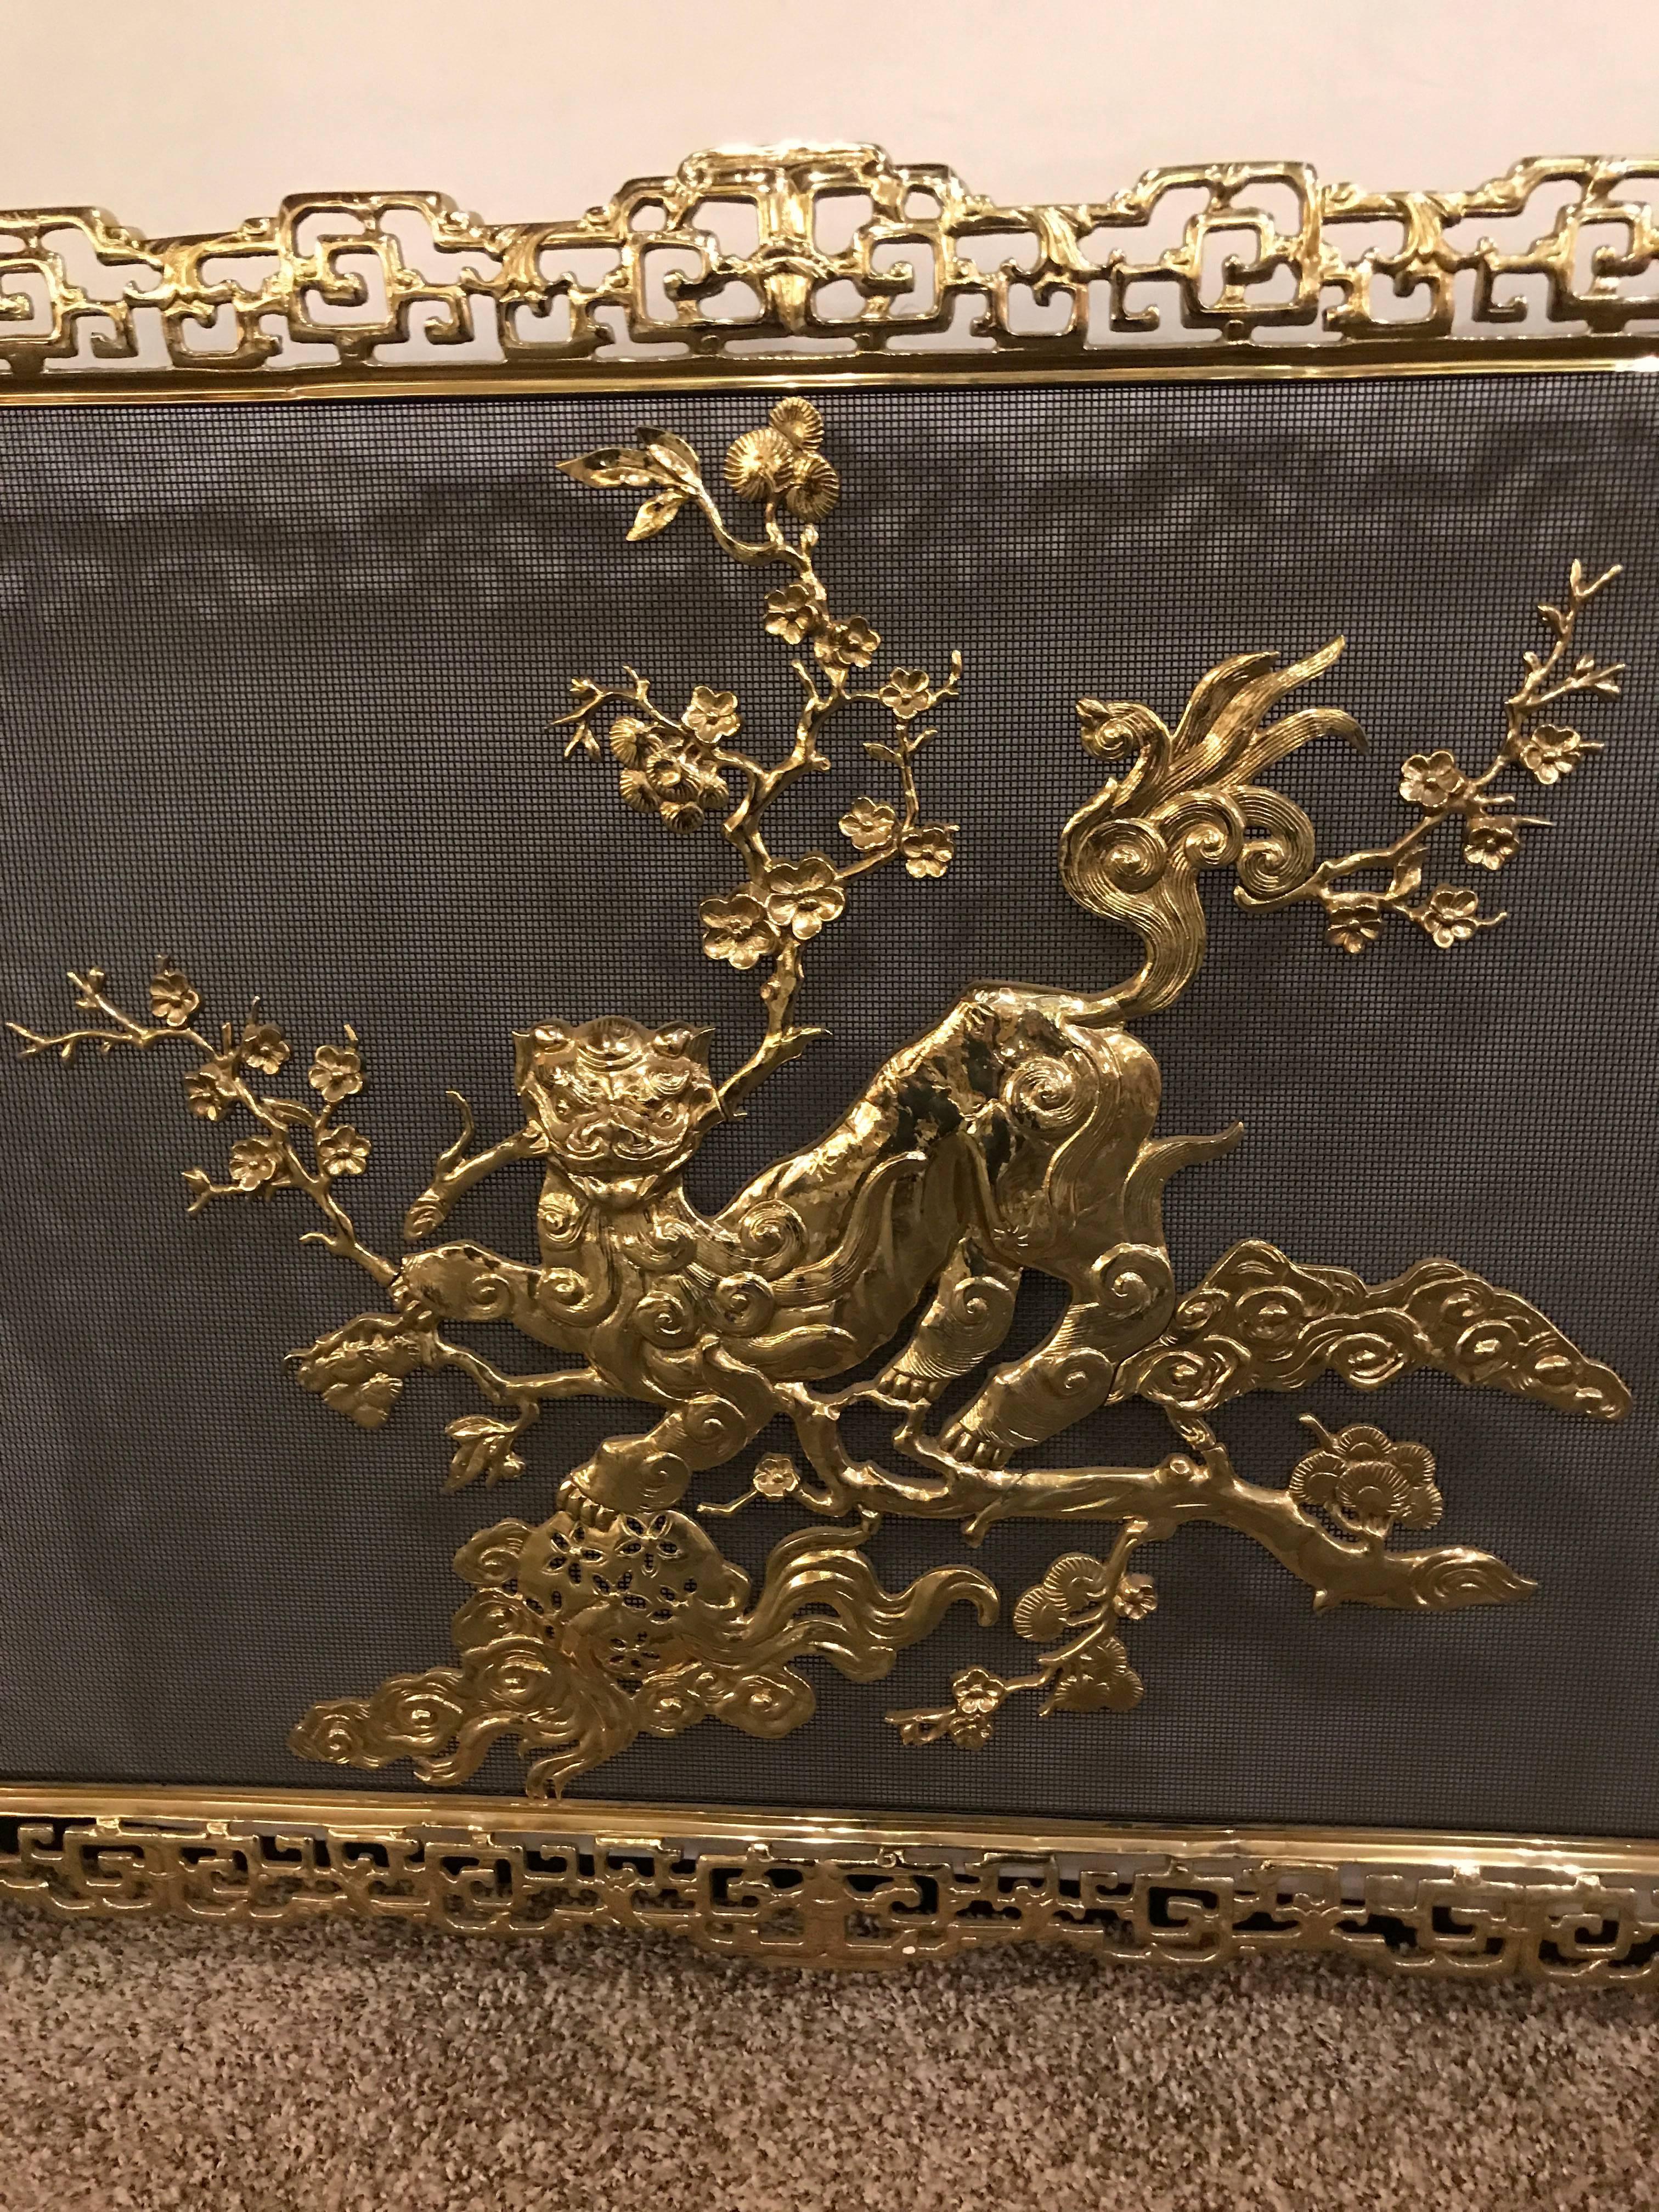 19th century French bronze in chinoiserie pattern fire screen. This large and impressive fire screen is solid bronze and is certain to add style and flair to any fireplace.